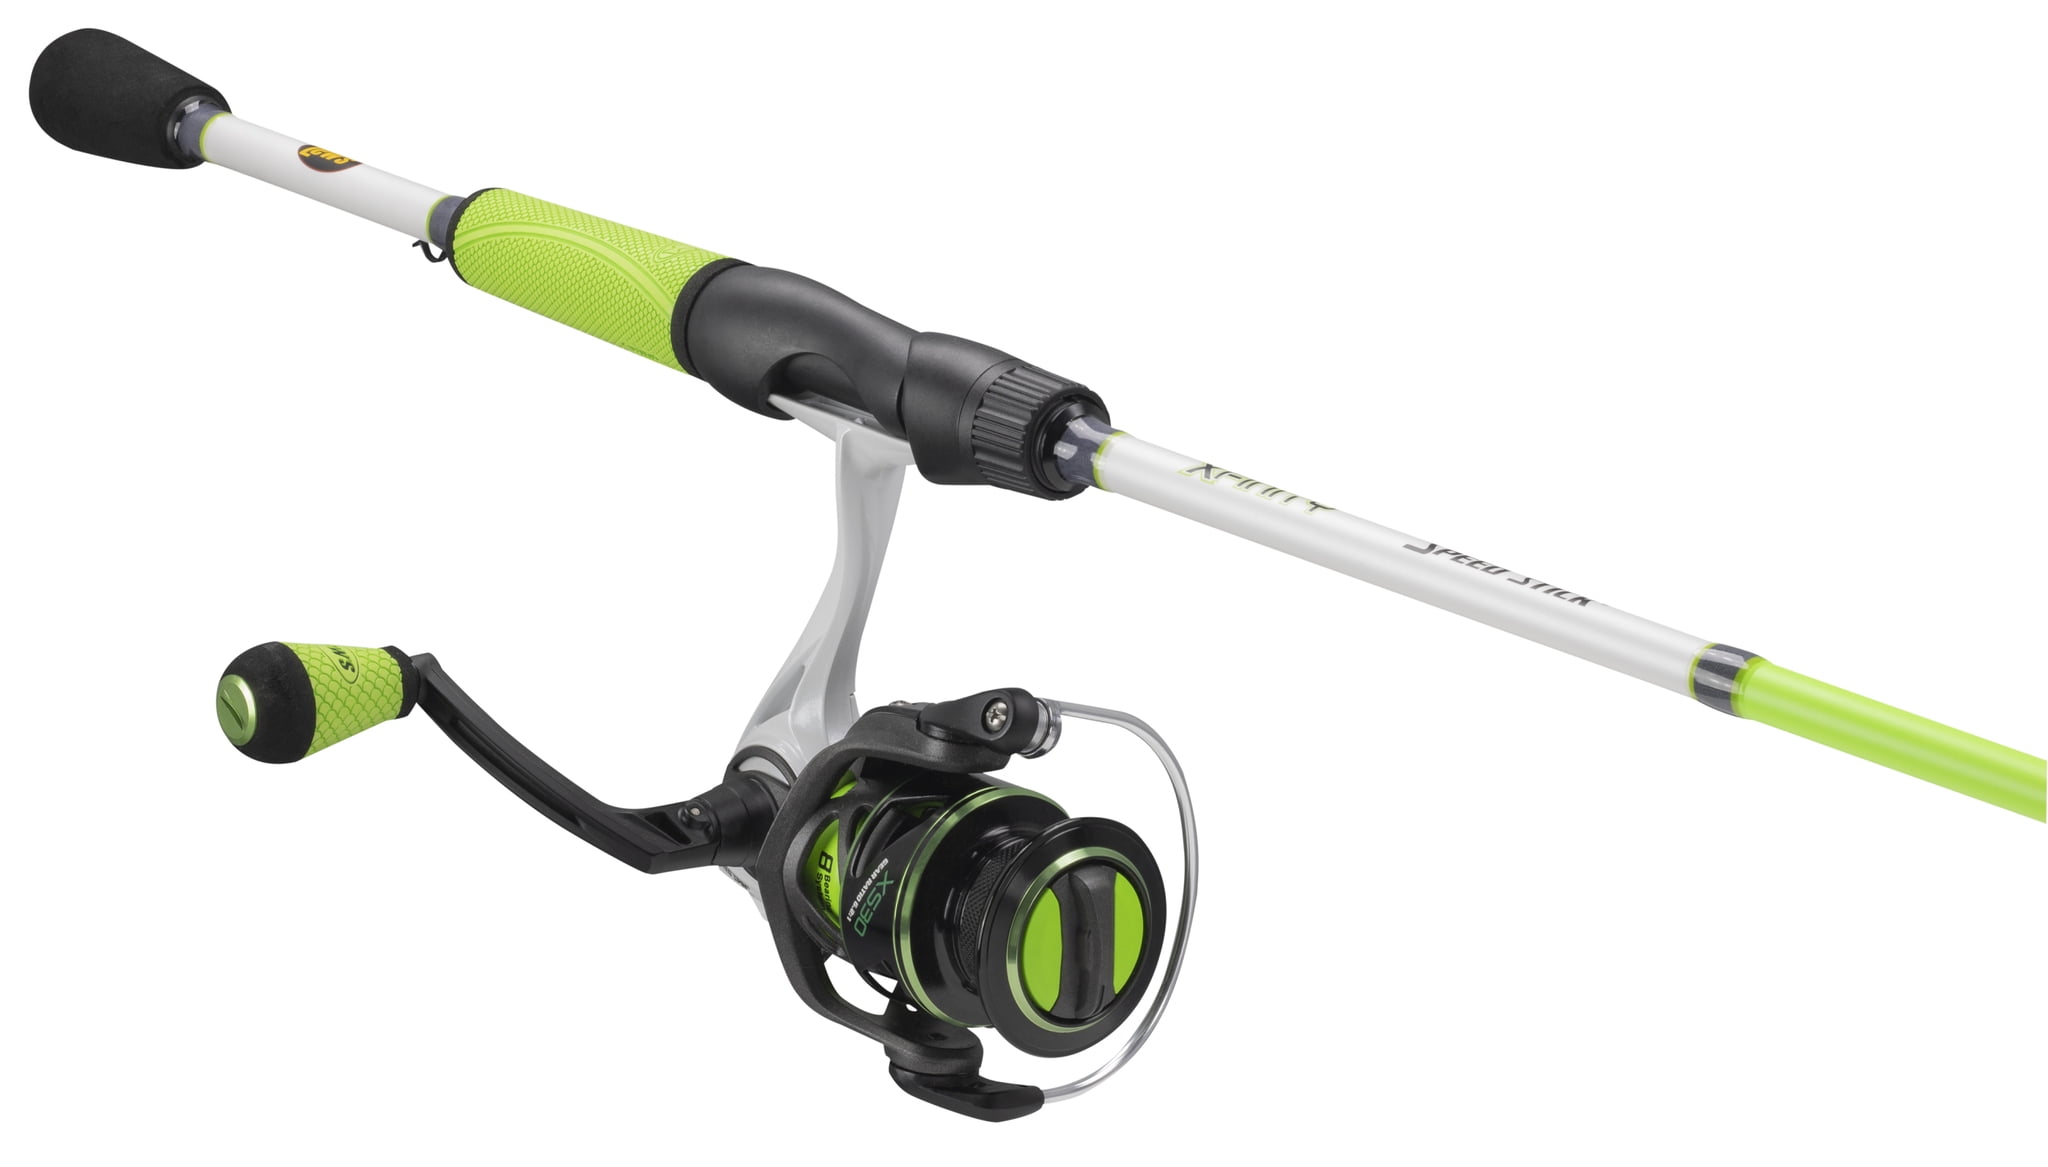 Lew's Xfinity Size 30 Speed Spin Spinning Fishing Reel